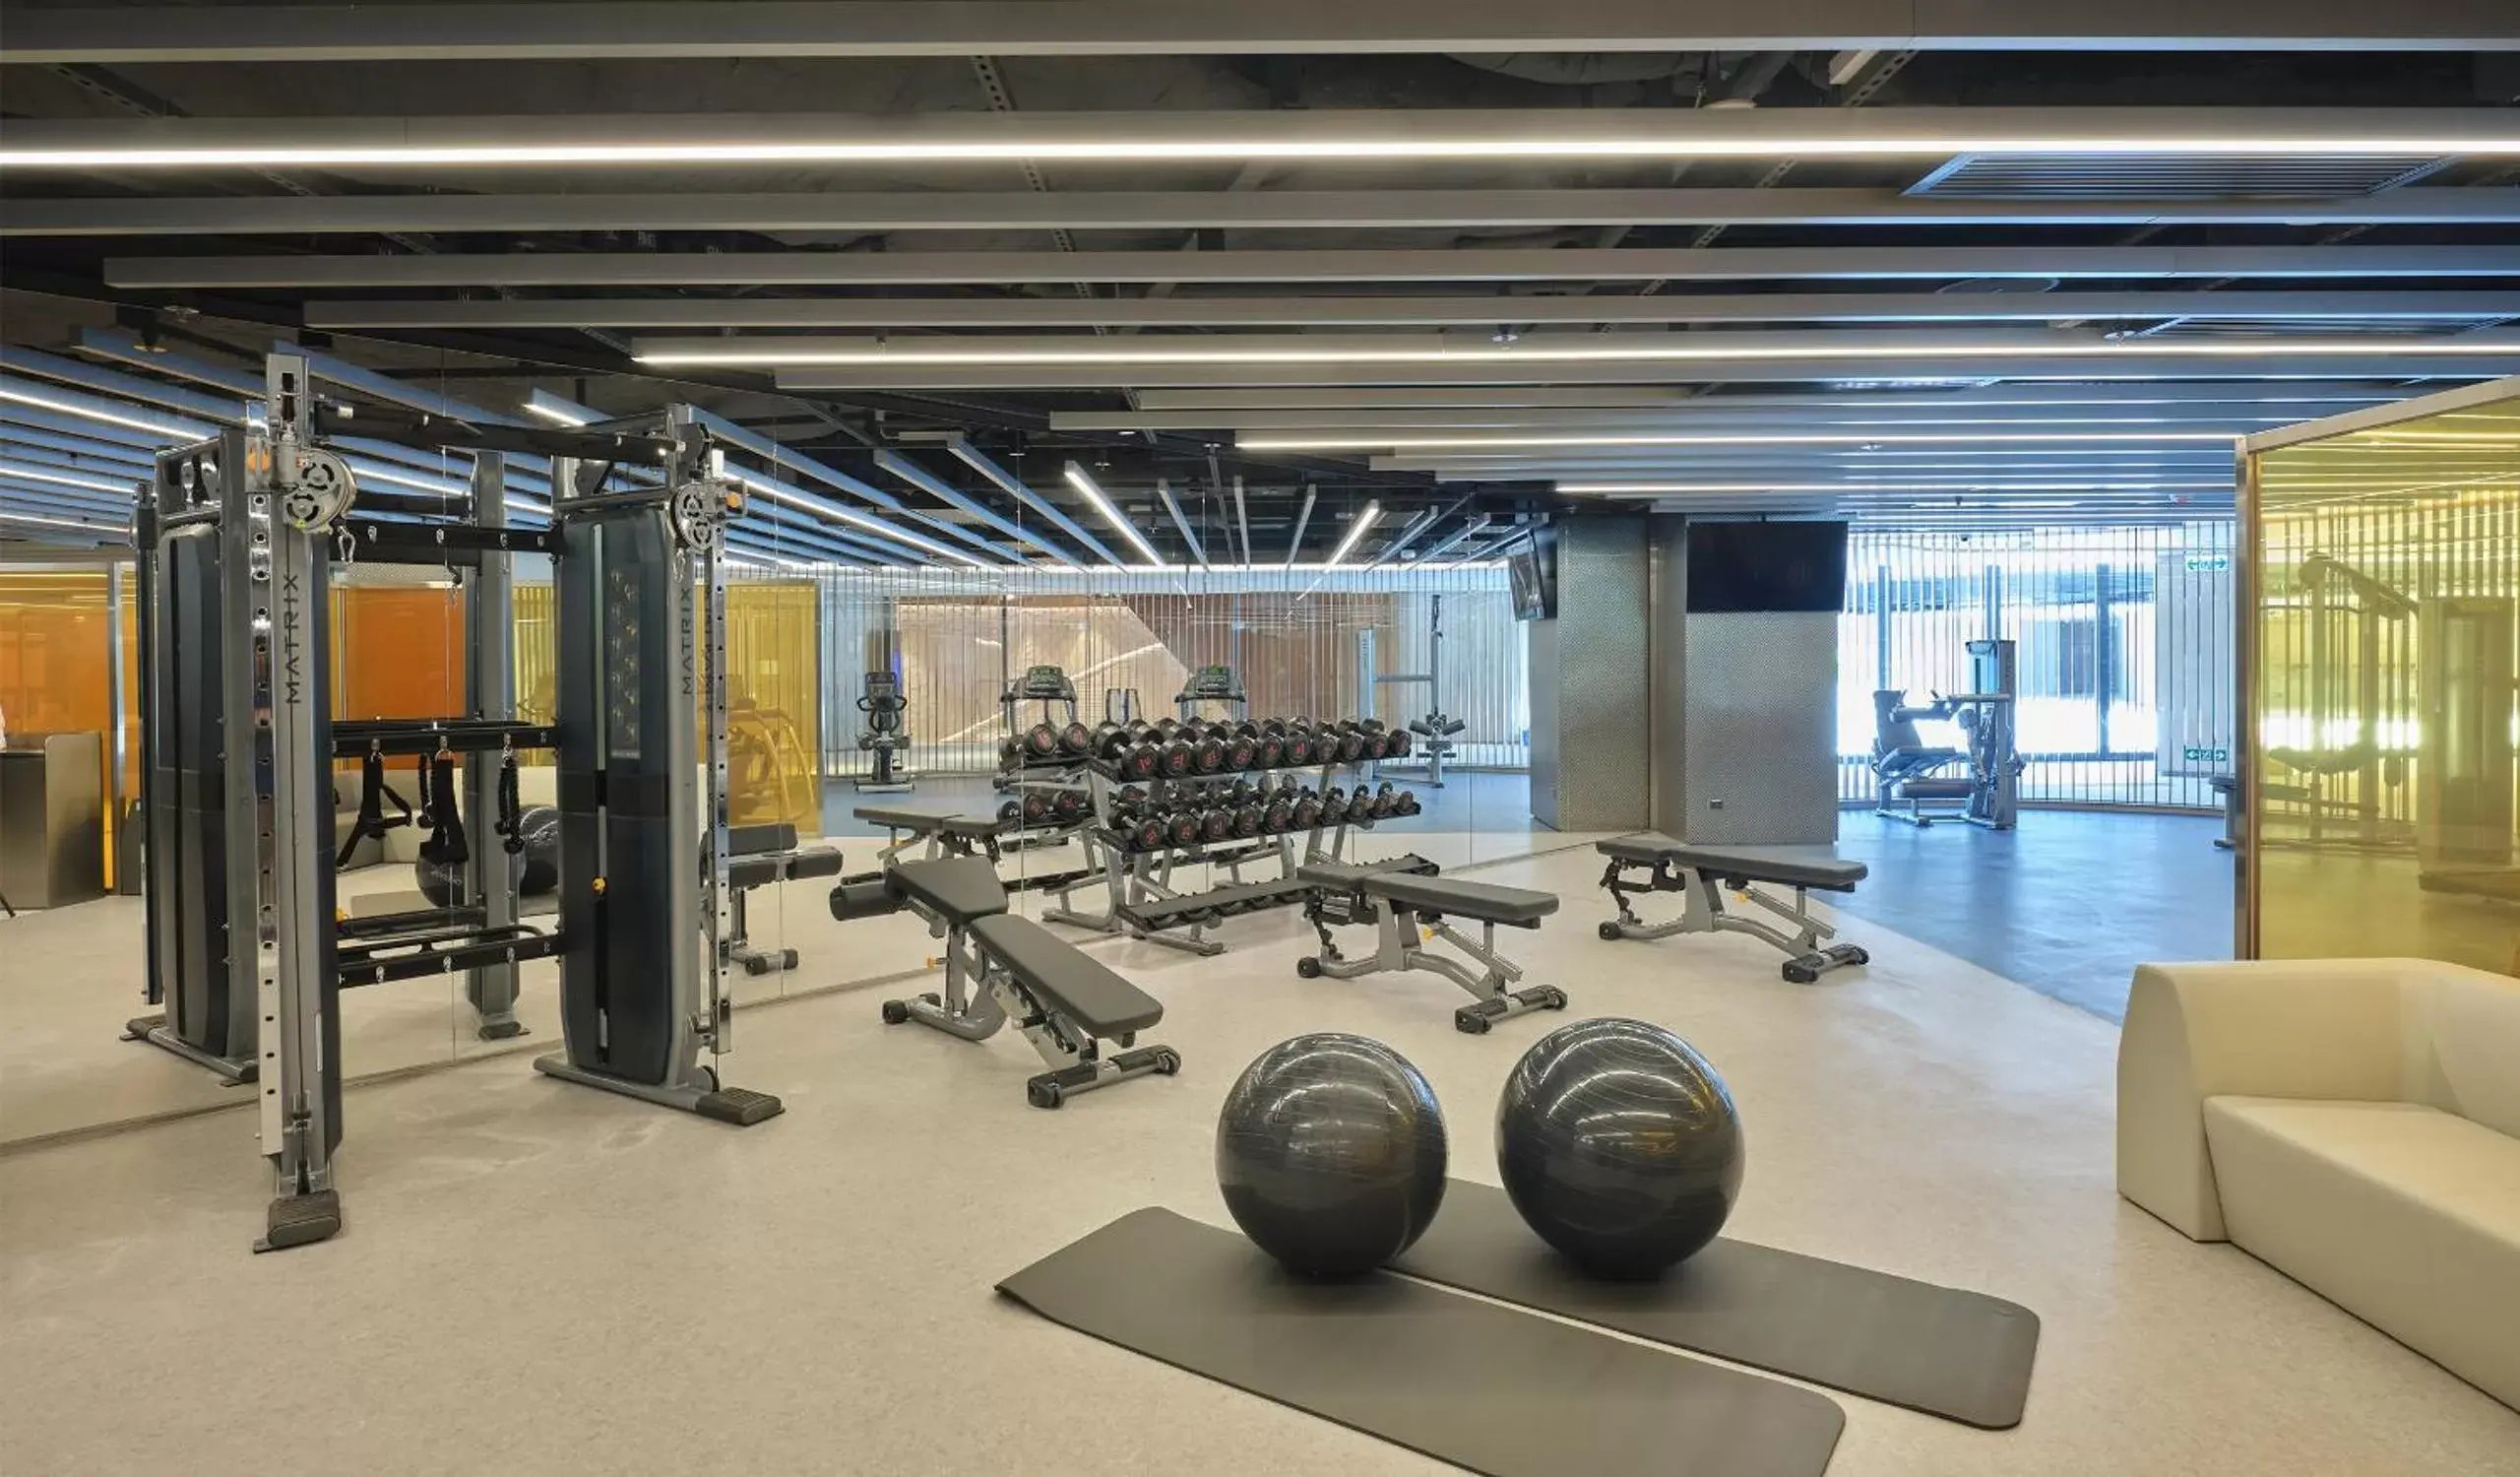 Fitness centre/facilities, Fitness Center/Facilities in WM Hotel